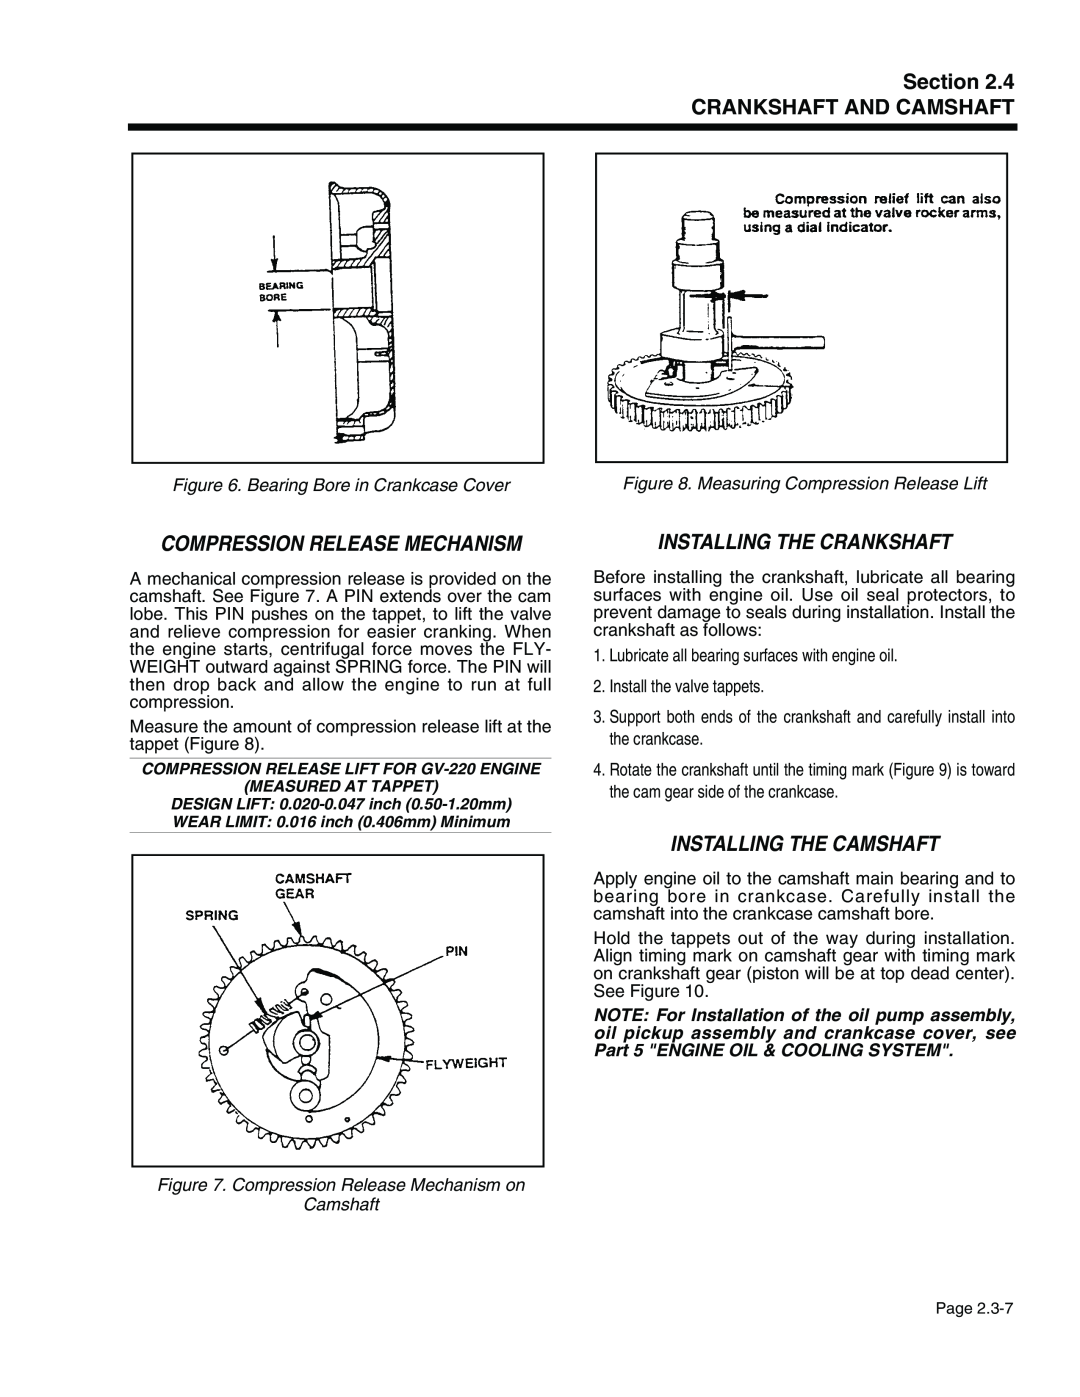 Generac Power Systems 941-2, 940-2 Compression Release Mechanism, Installing The Crankshaft, Installing The Camshaft 